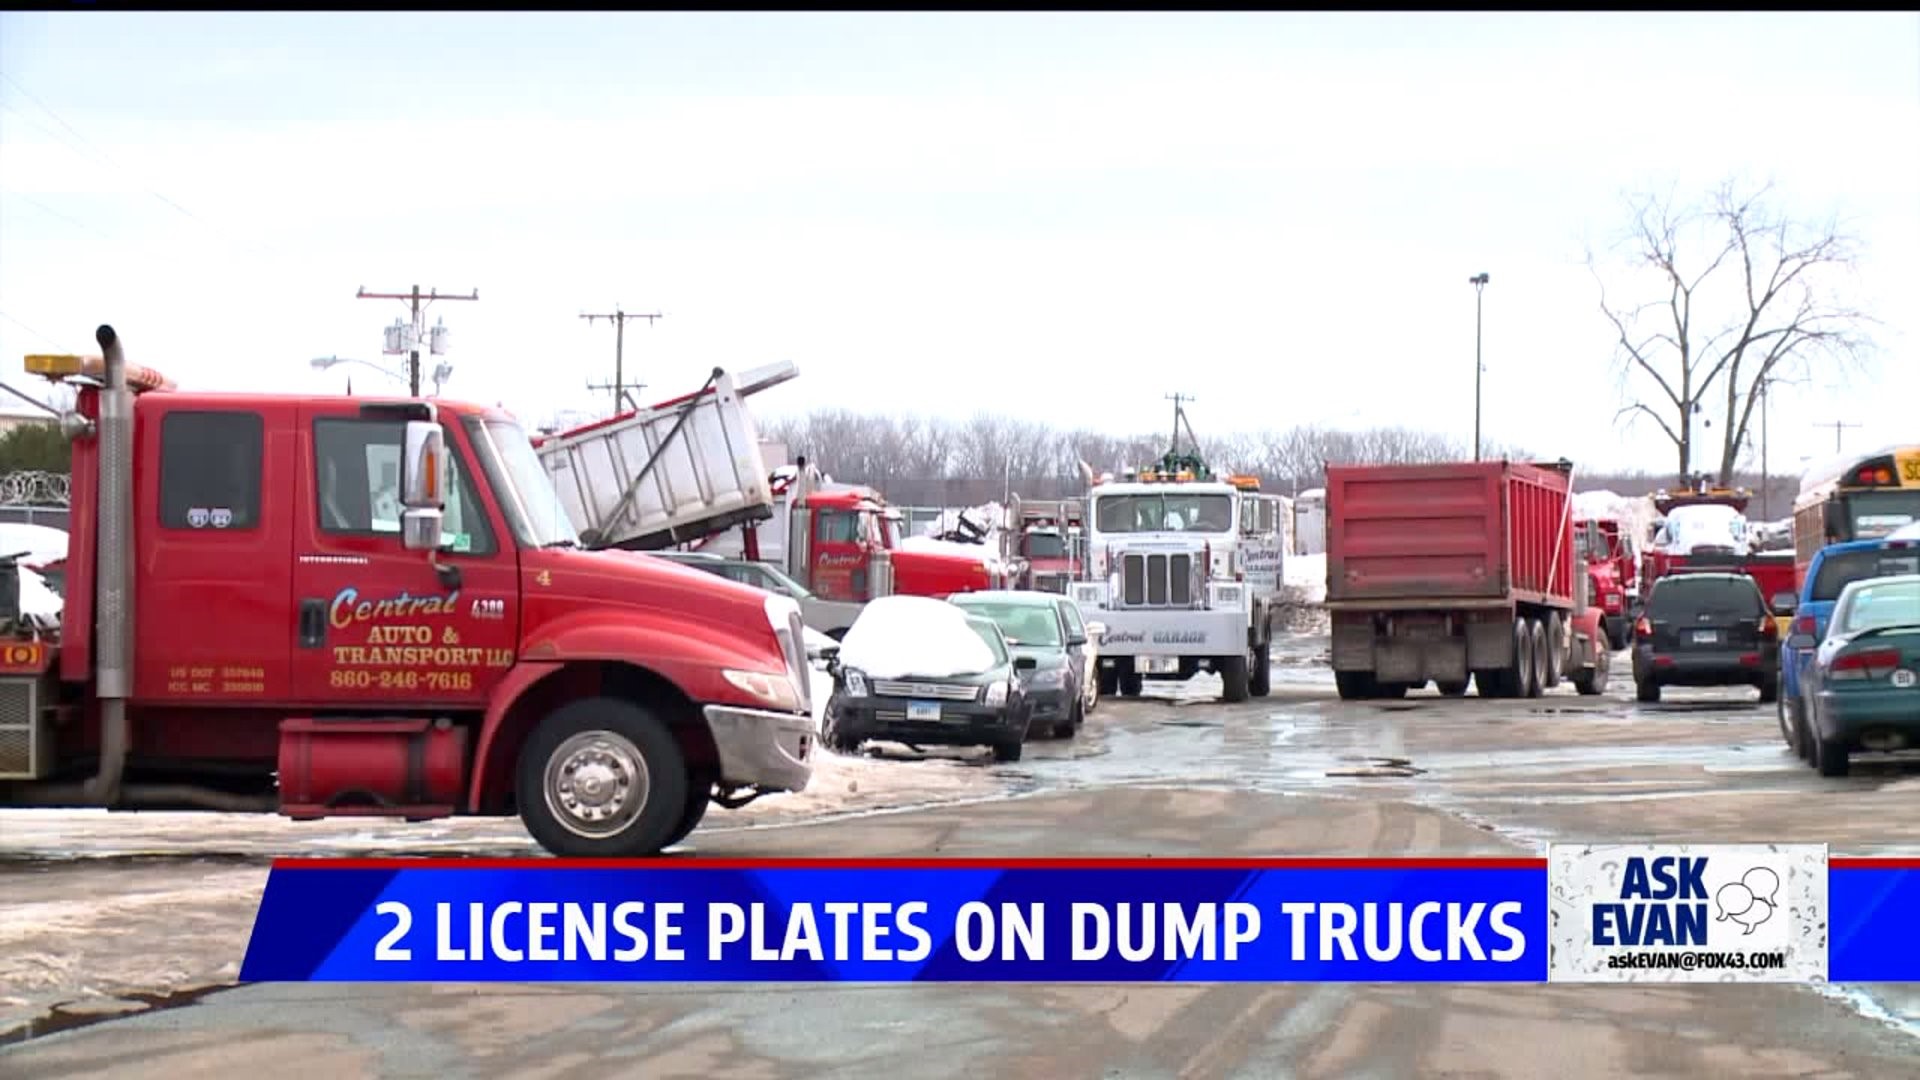 `Ask Evan`: "Why do some dump trucks have two license plates?"